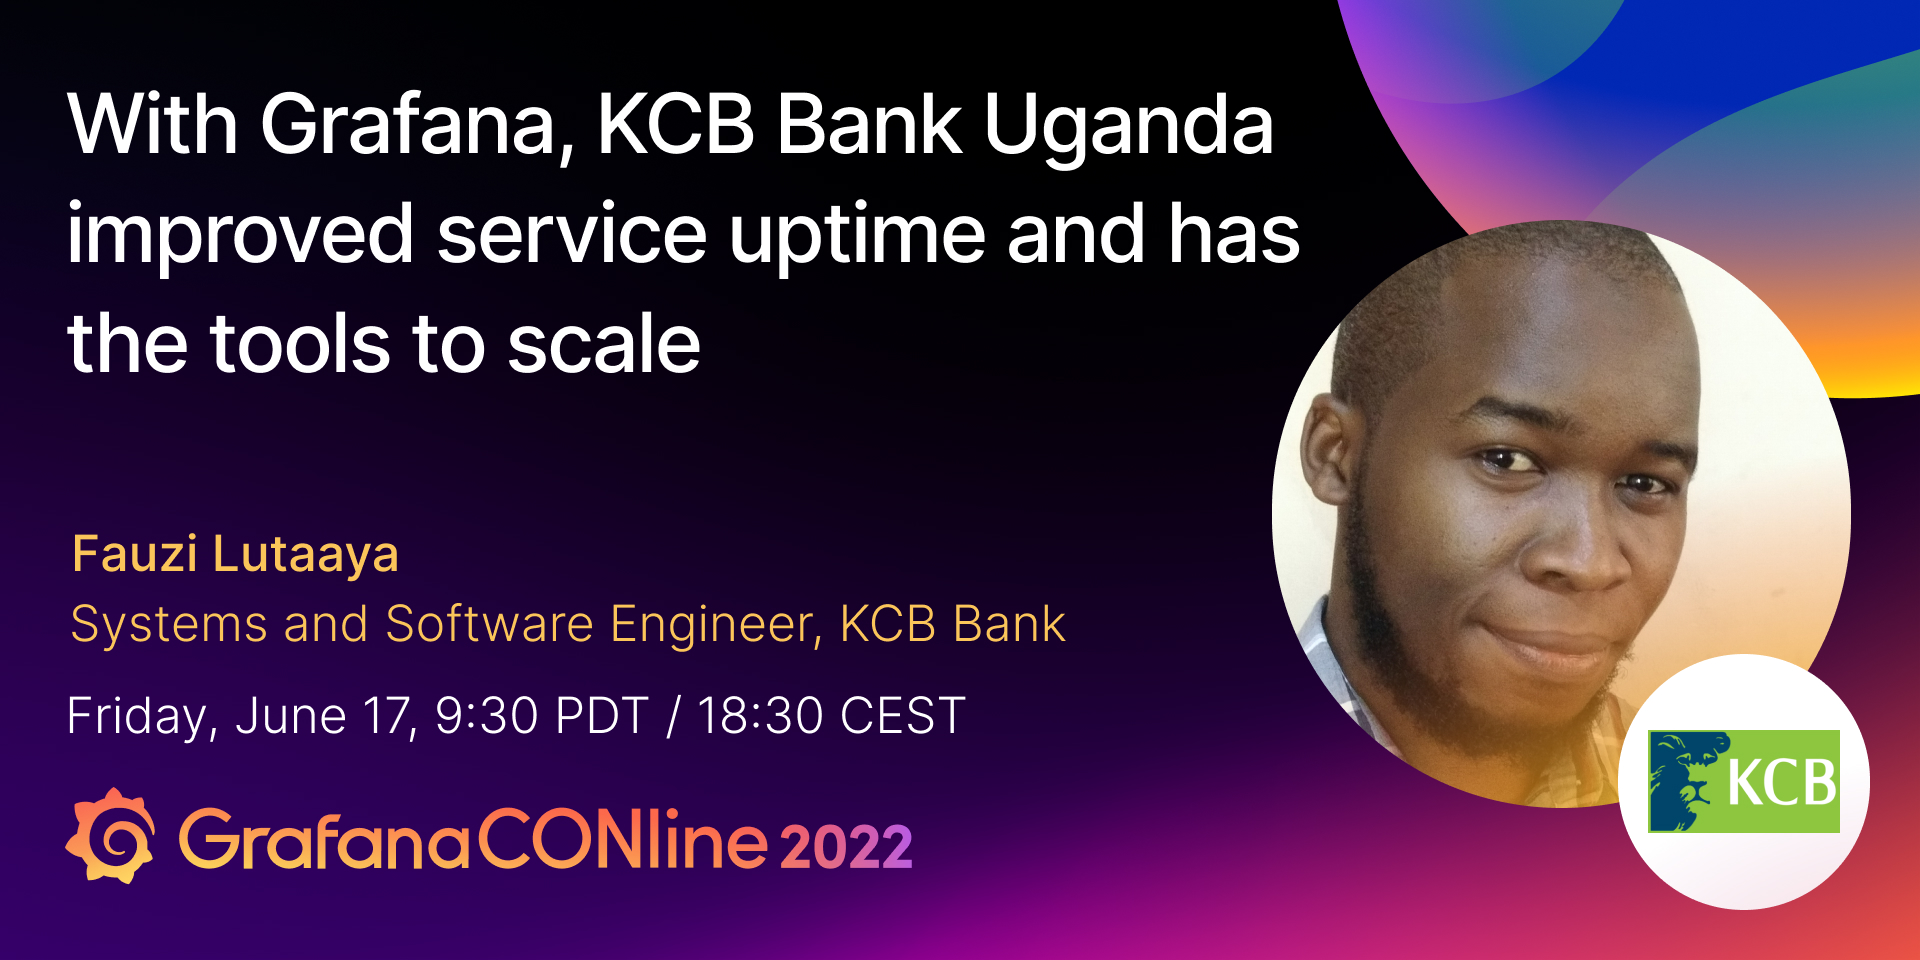 With Grafana, KCB Bank Uganda improved service uptime and has the tools to scale